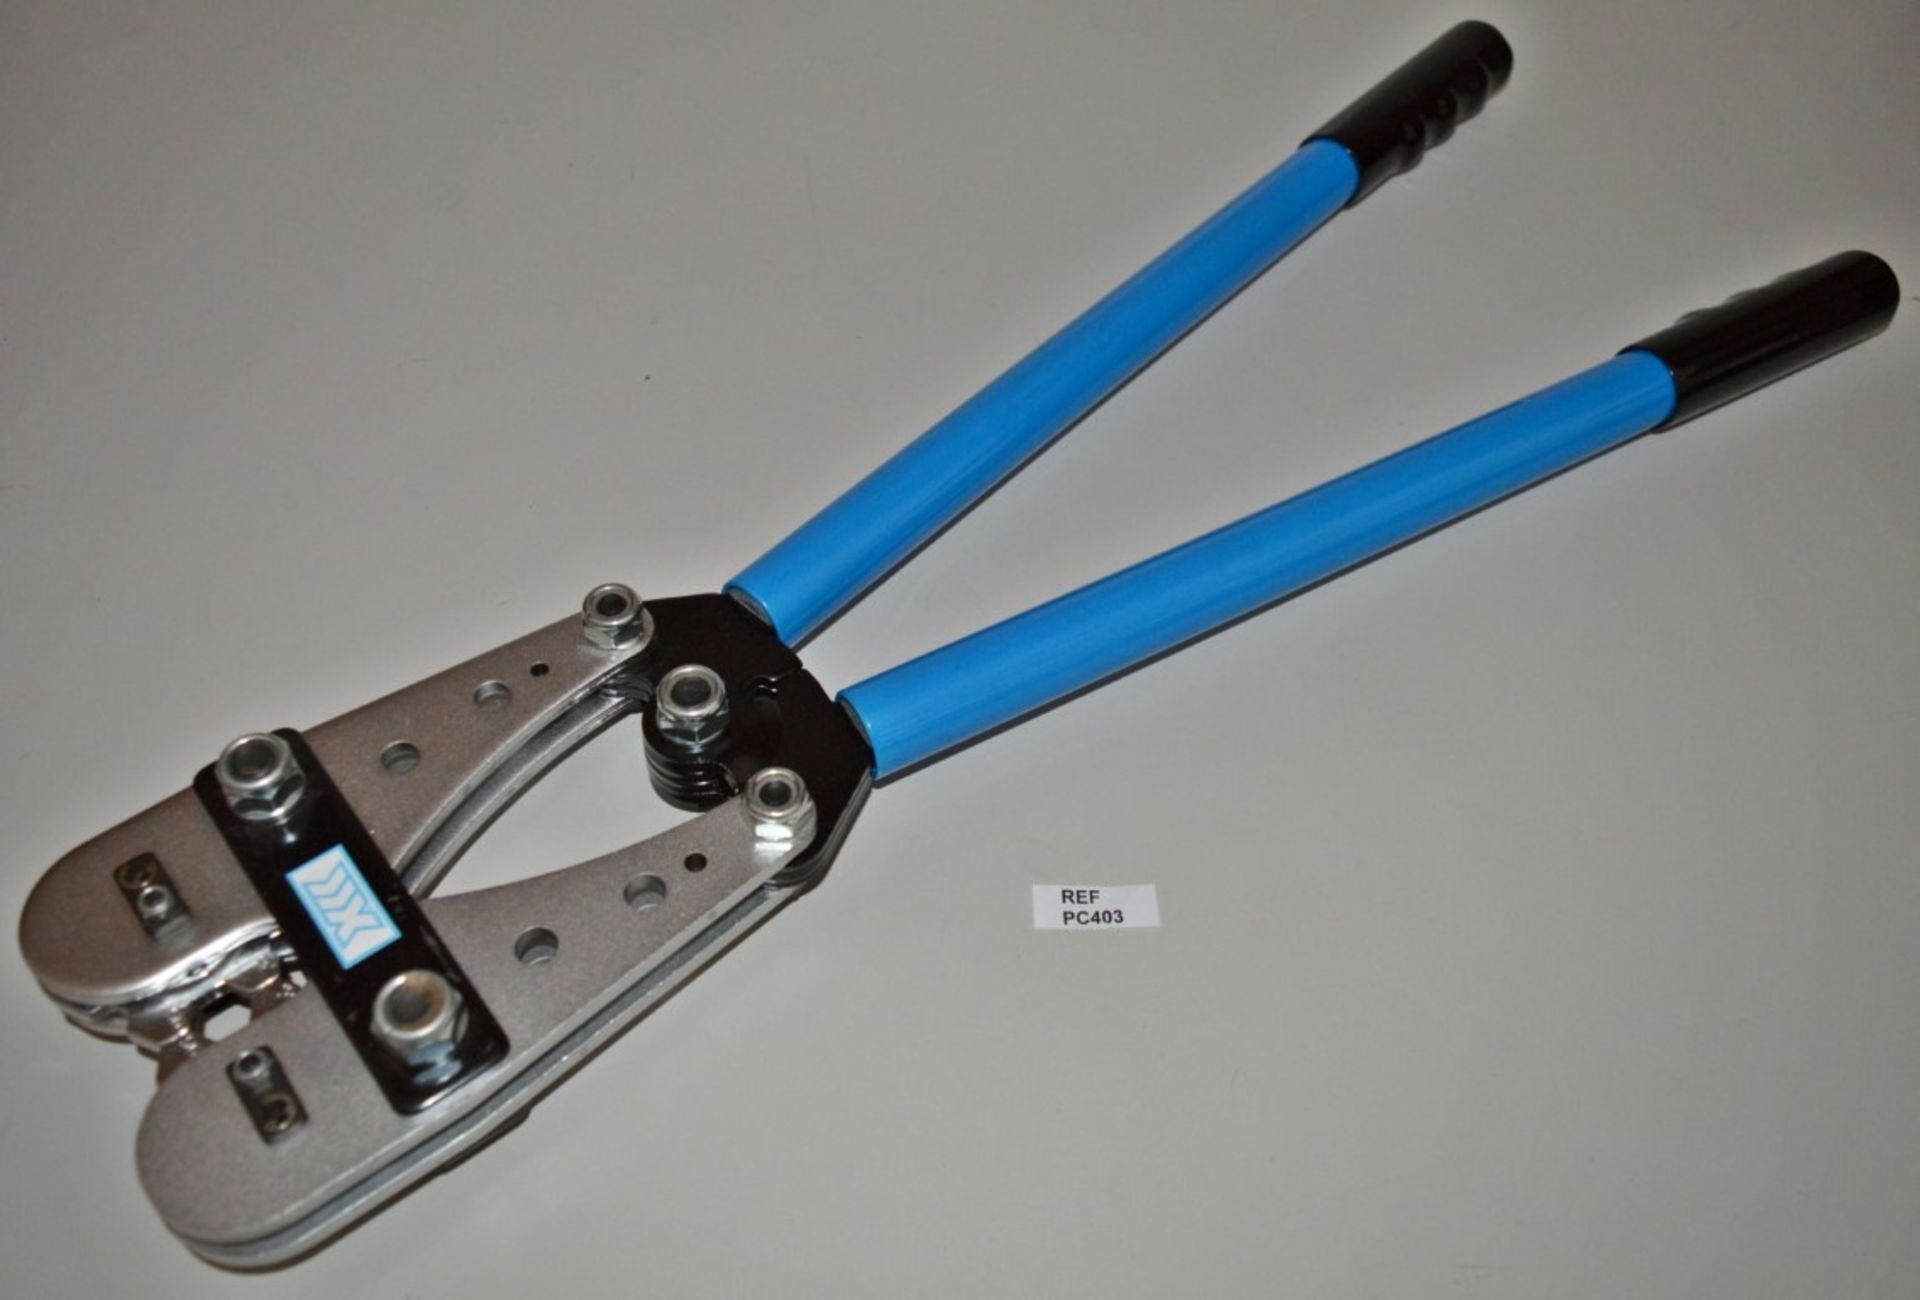 1 x HD Copper Tube Terminal Crimp Tool With Adjustable Hex - 62cm Length - XXX Branded - New and - Image 7 of 7